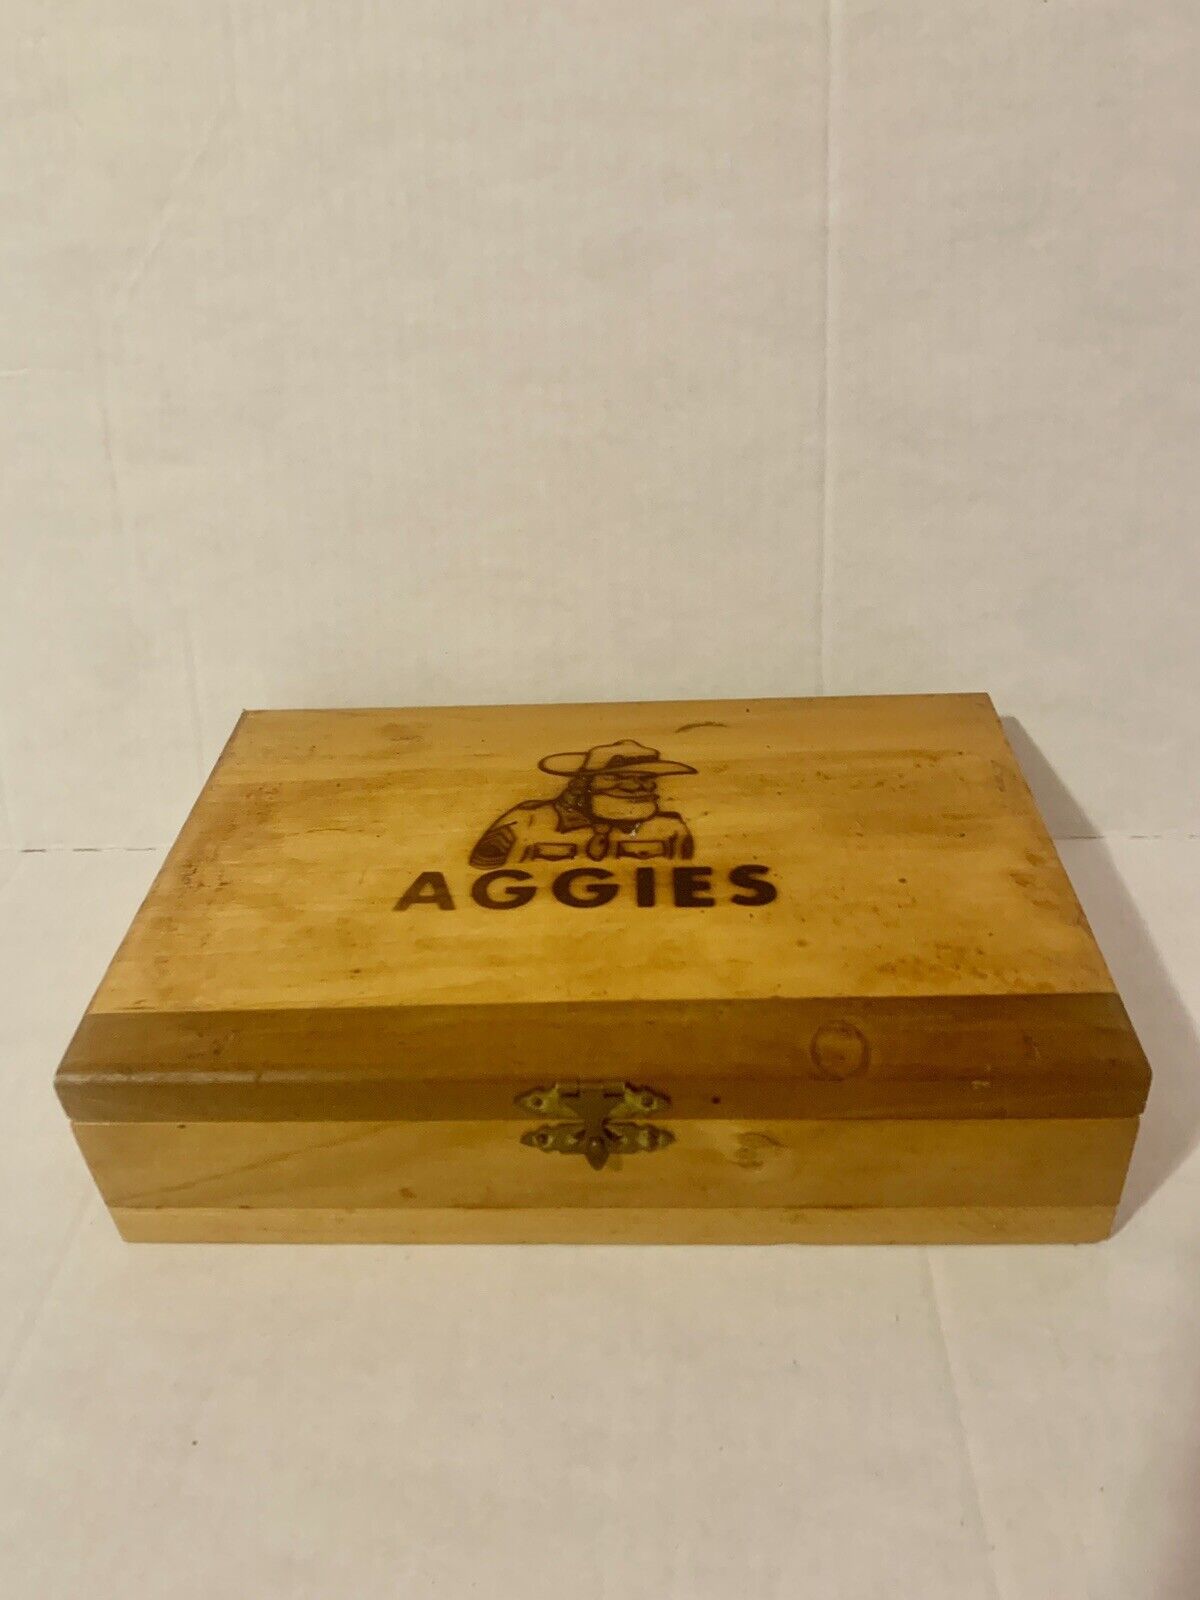 Aggies Wooden Box With Lid & Latch Closure | Tabletop | Keepsake